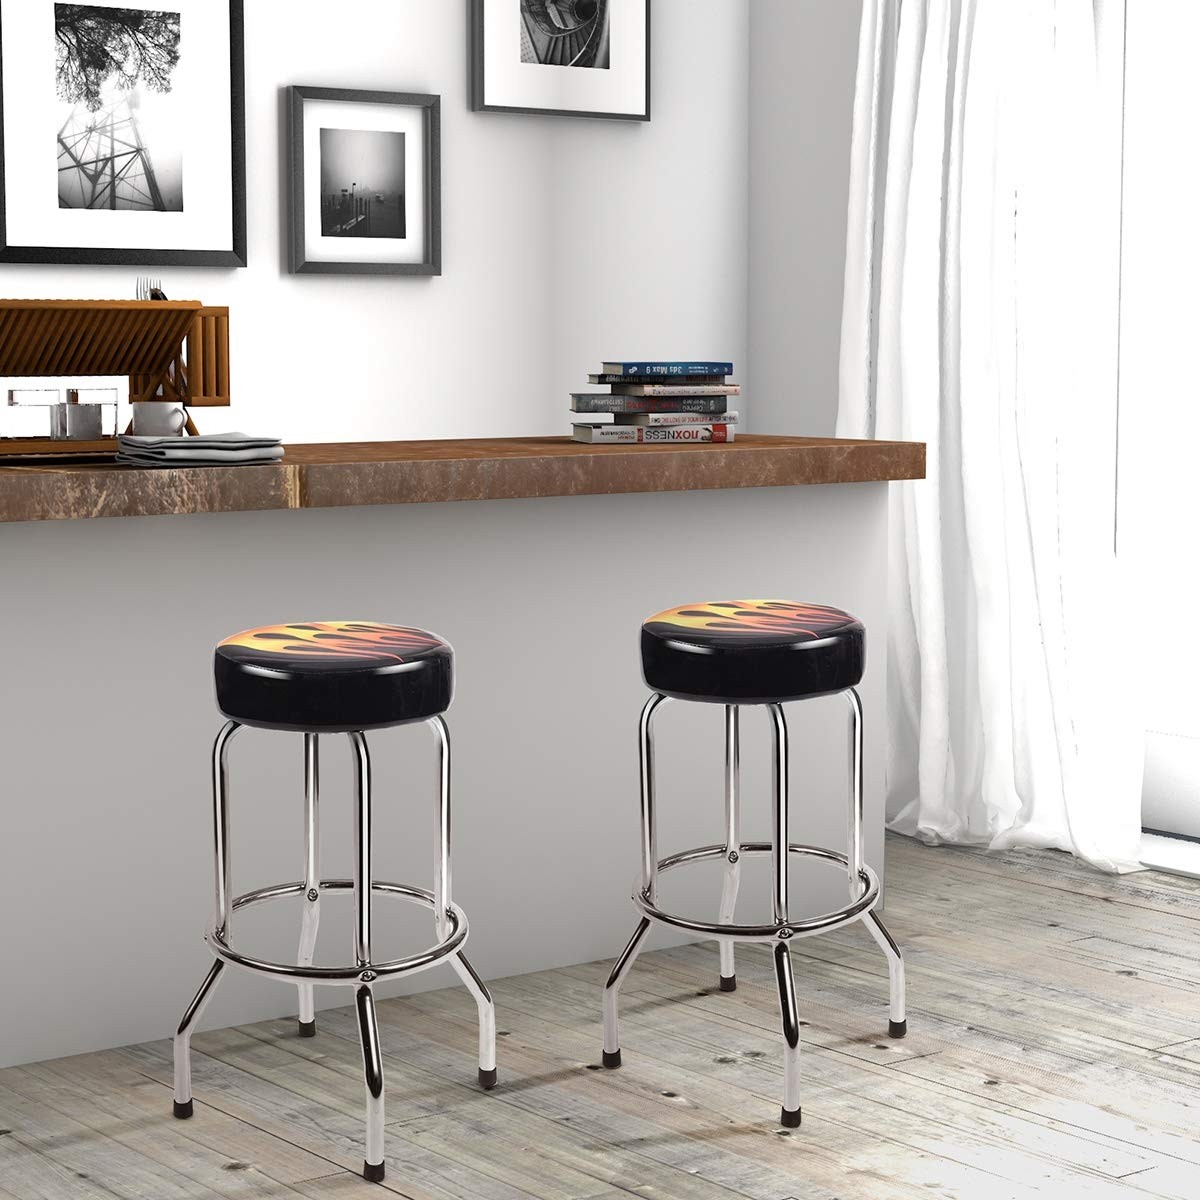 29 In. Height Round Counter Flame Bar Stools